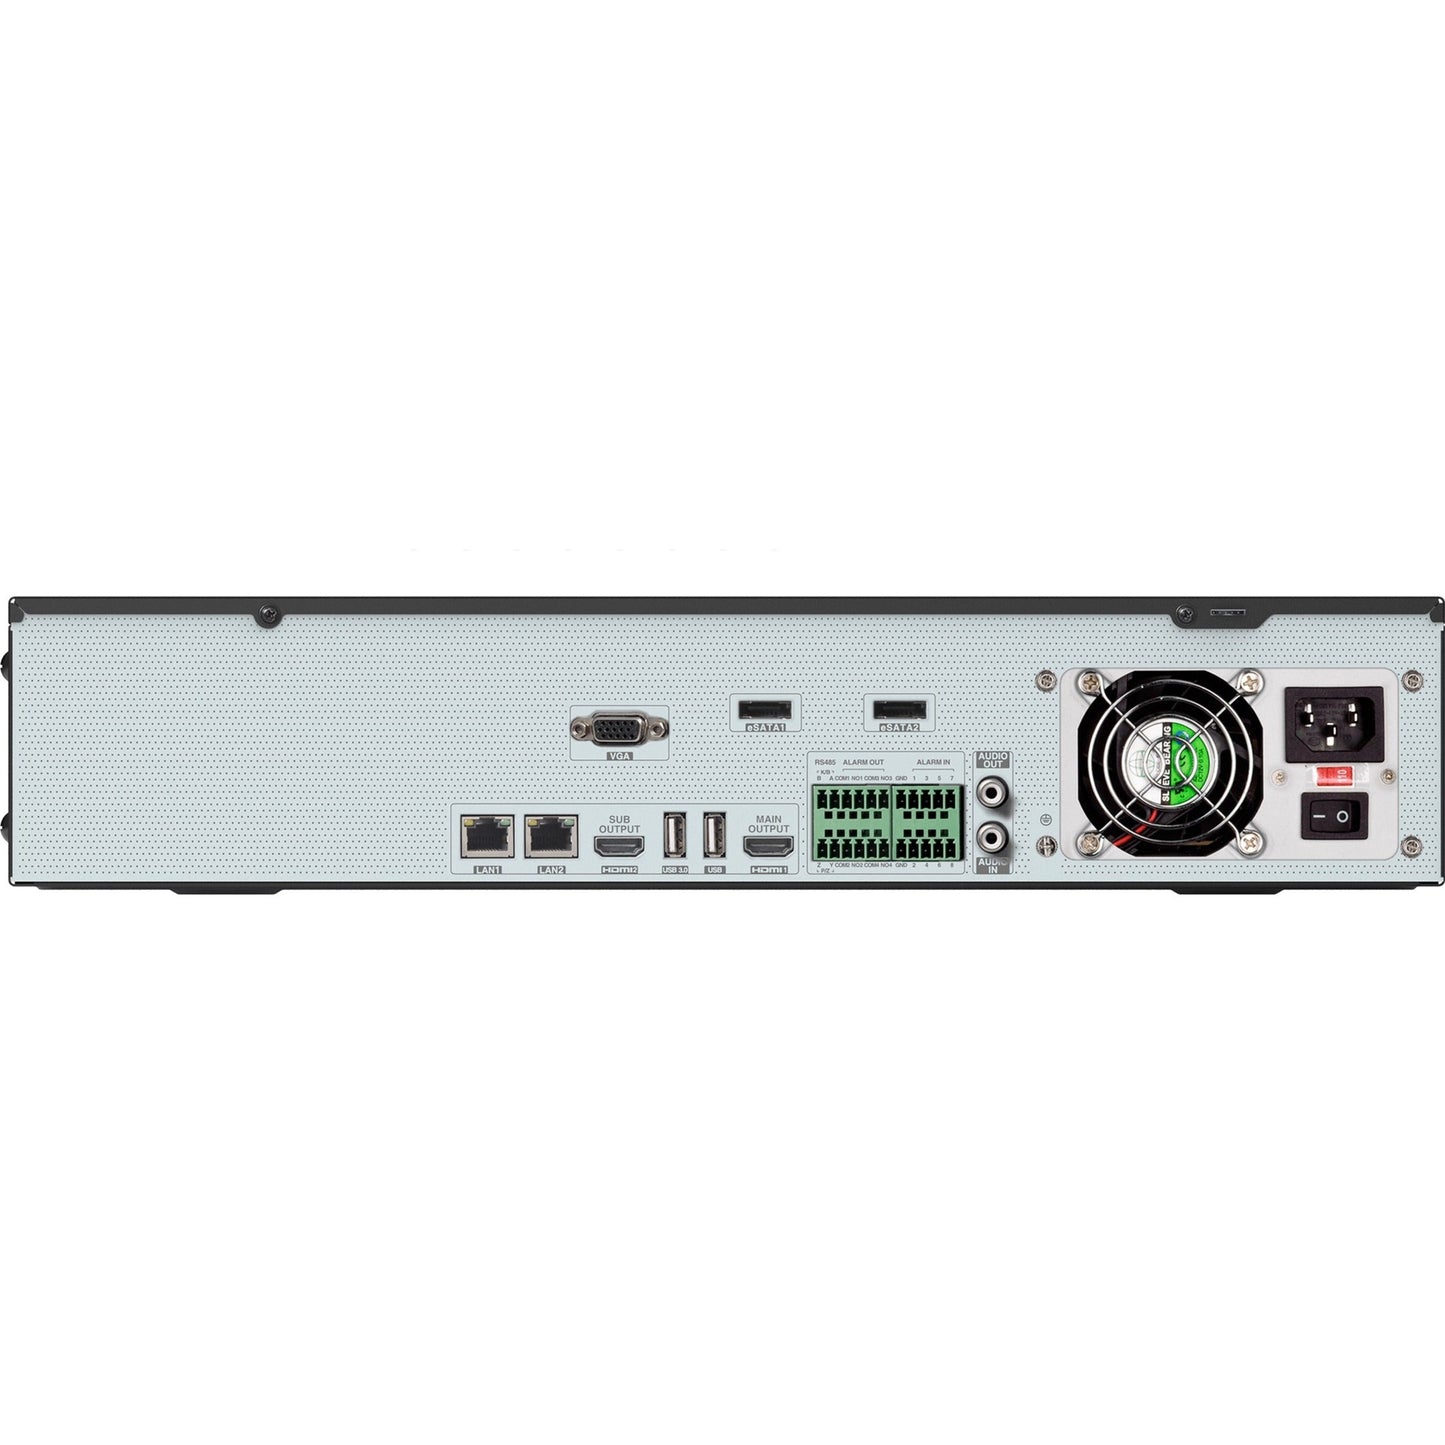 Speco 64 Channel 4K H.265 NVR with Smart Analytics - 24 TB HDD